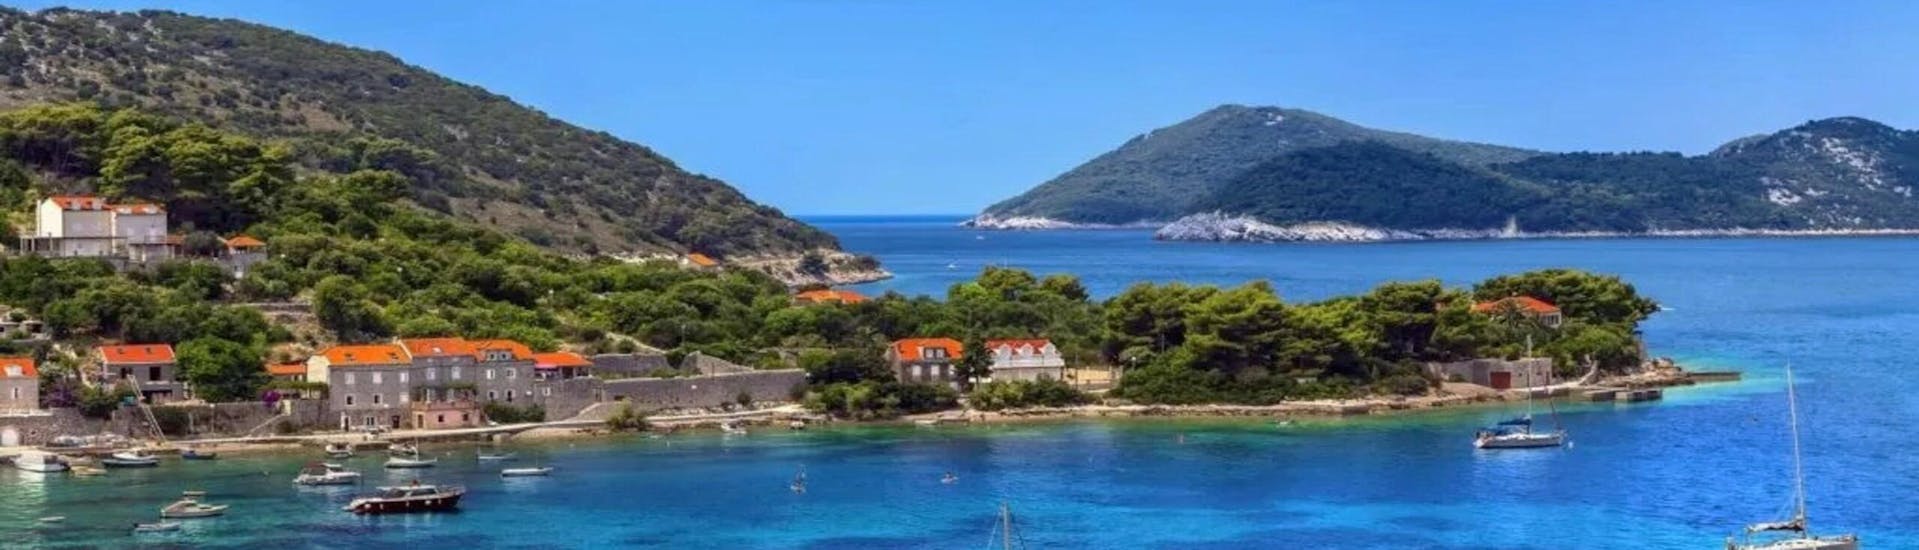 Here is a view you might have during a trip with Karuzo Boat Tours Dubrovnik.